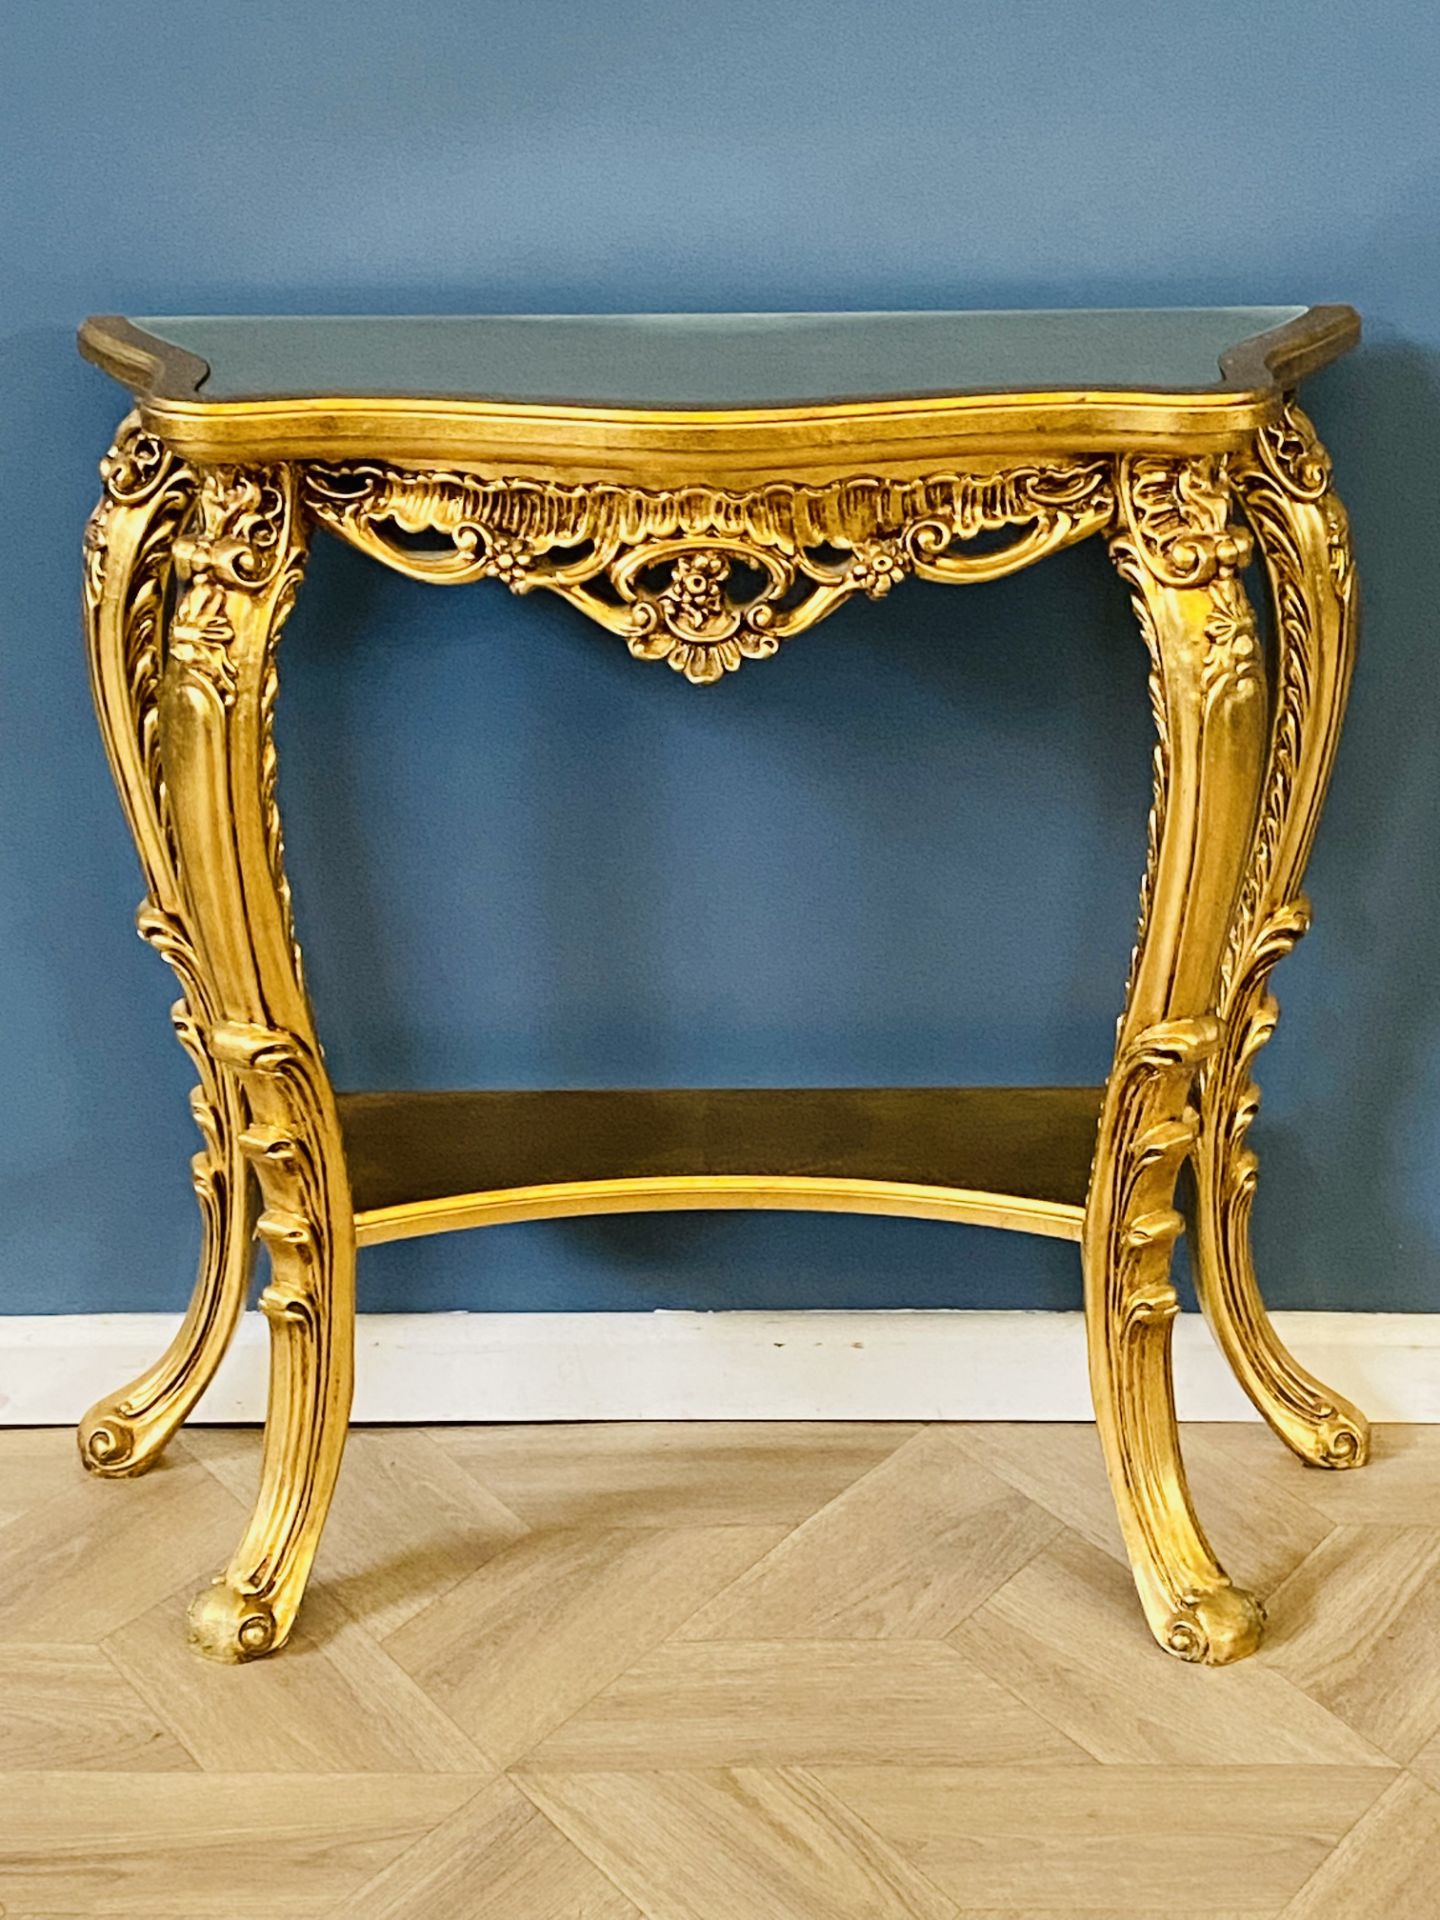 Serpentine carved giltwood console table - Image 2 of 7